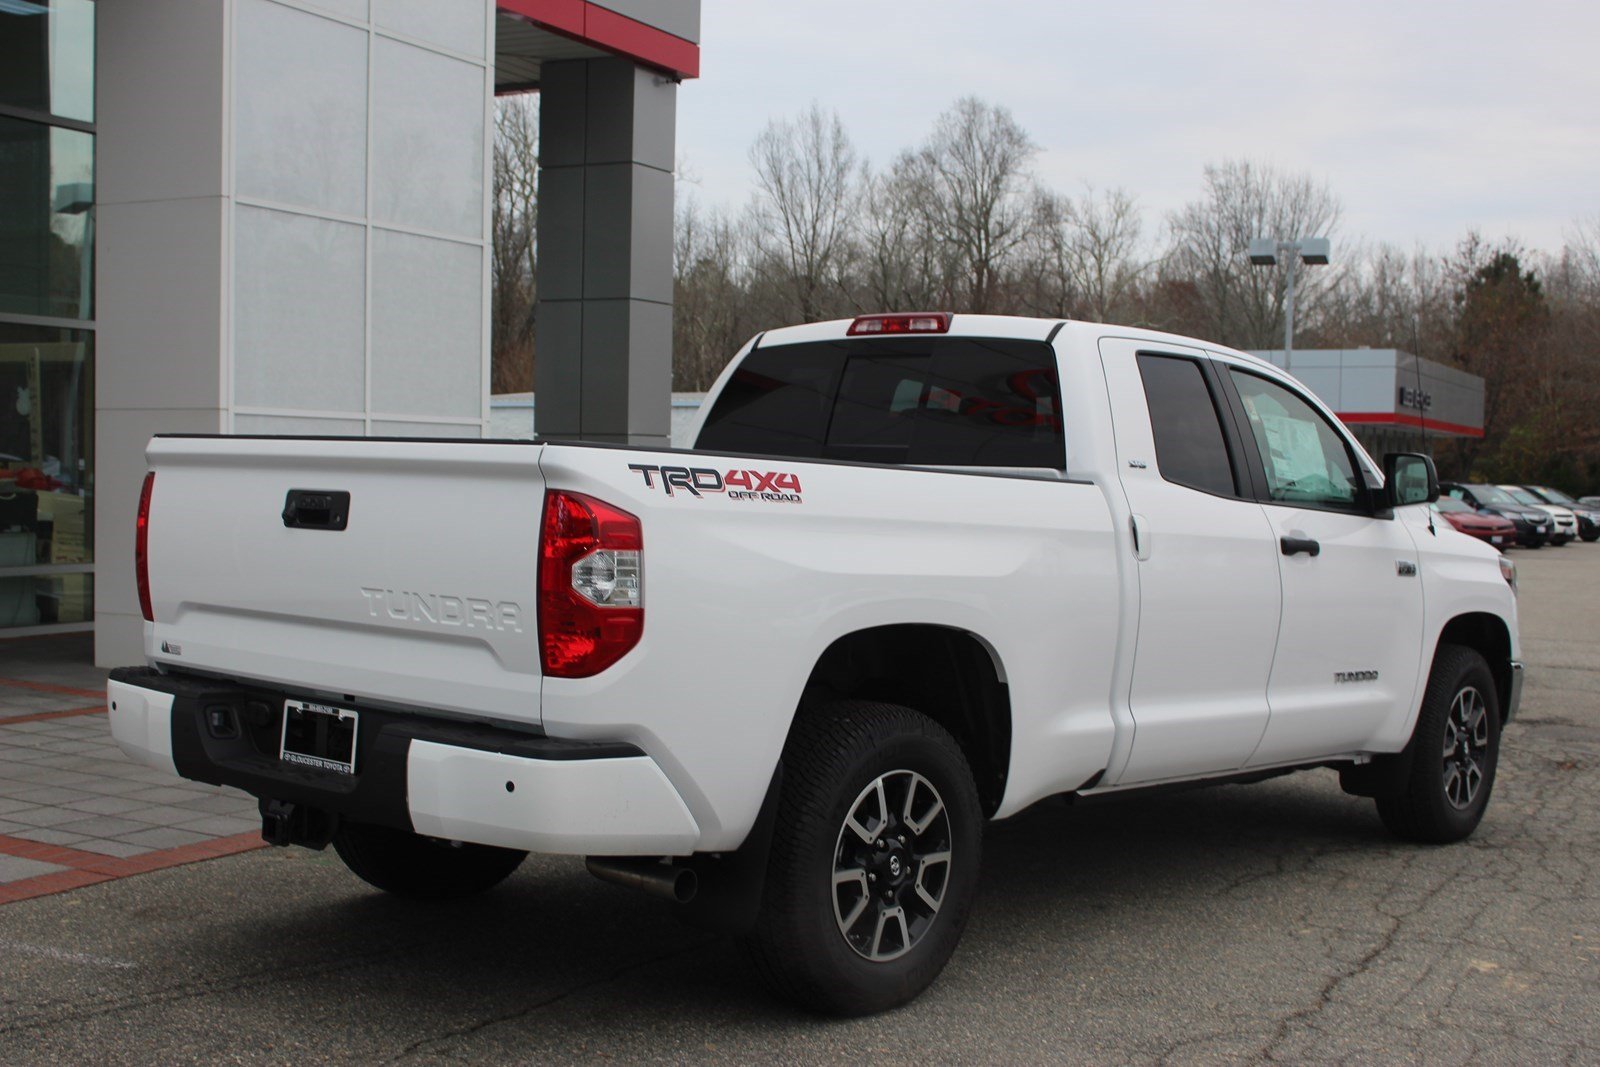 New 2019 Toyota Tundra 4WD SR5 Crew Cab Pickup in Gloucester #8481